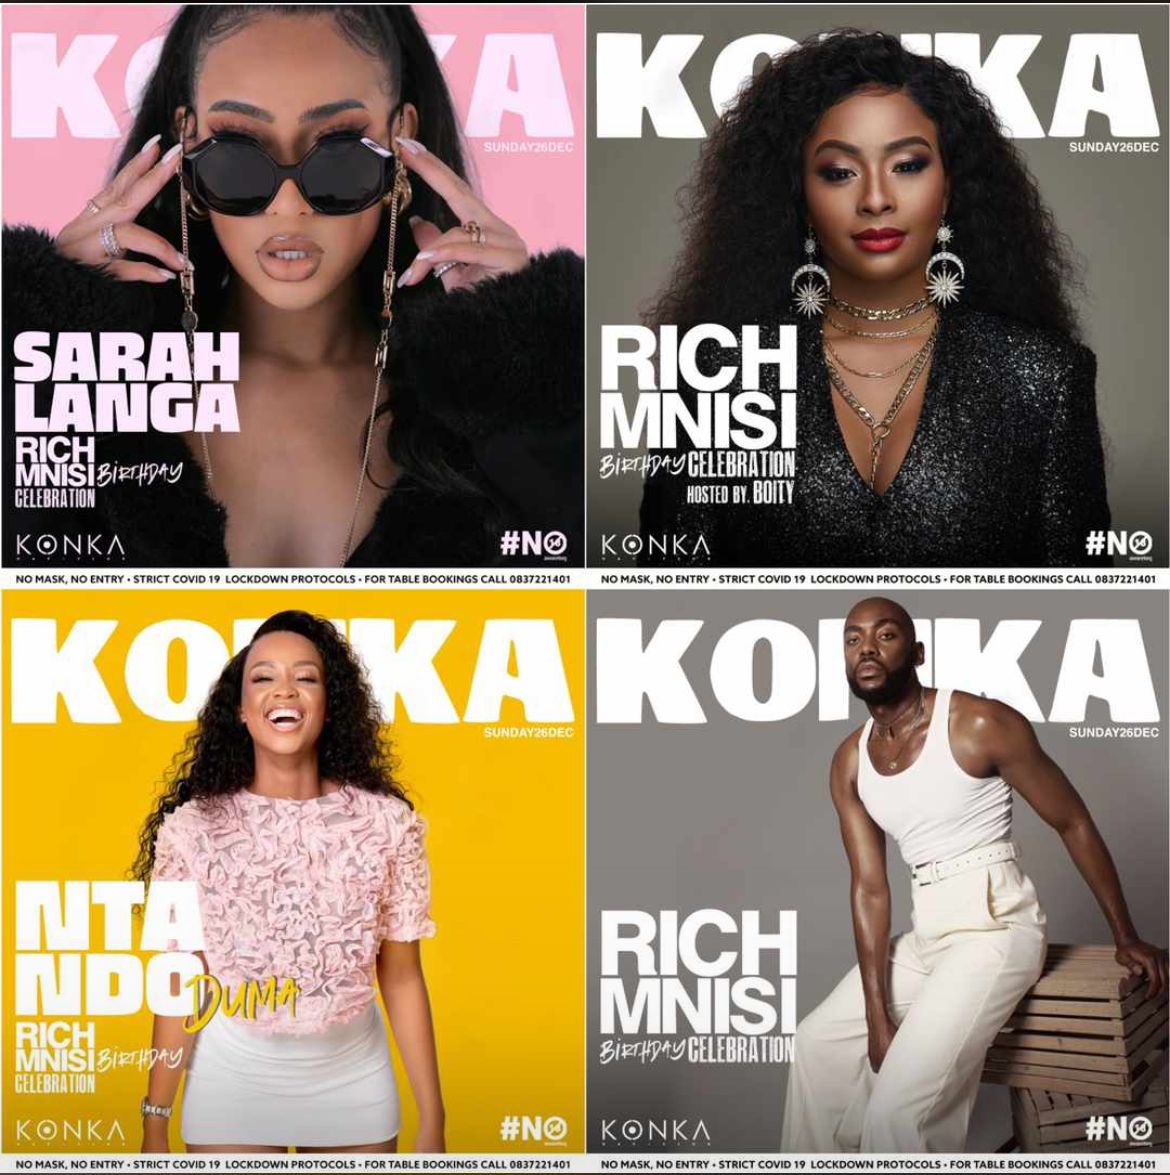 Celebrating @therichmnisi today @KonkaSoweto 🥳🥳🥳 See your faves such as; @Boity @sarahlanga @dumantando20 and many more 💃🏾🔥 Let’s #KonkaSunday it!